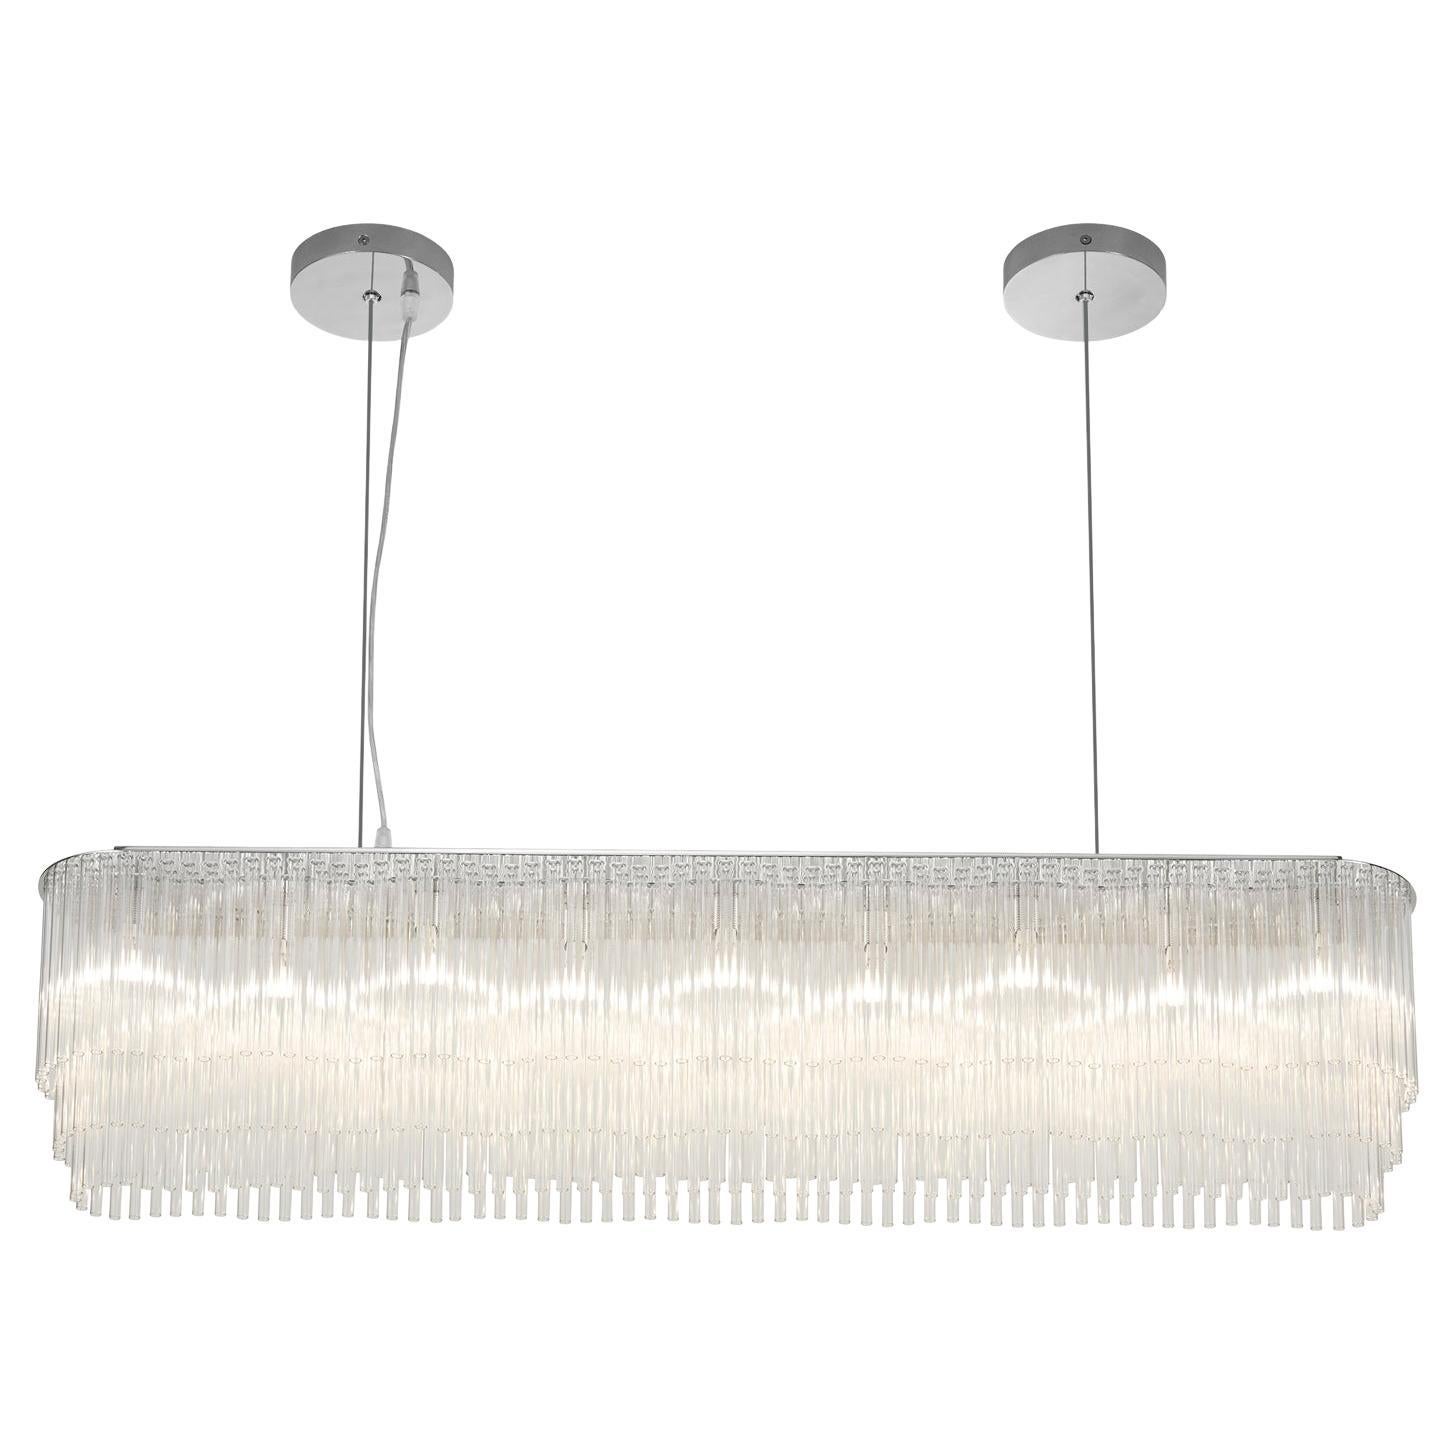 Linear Chandelier Thin 1445mm/58.75" in Polished Chrome / Tiered Glass Profile